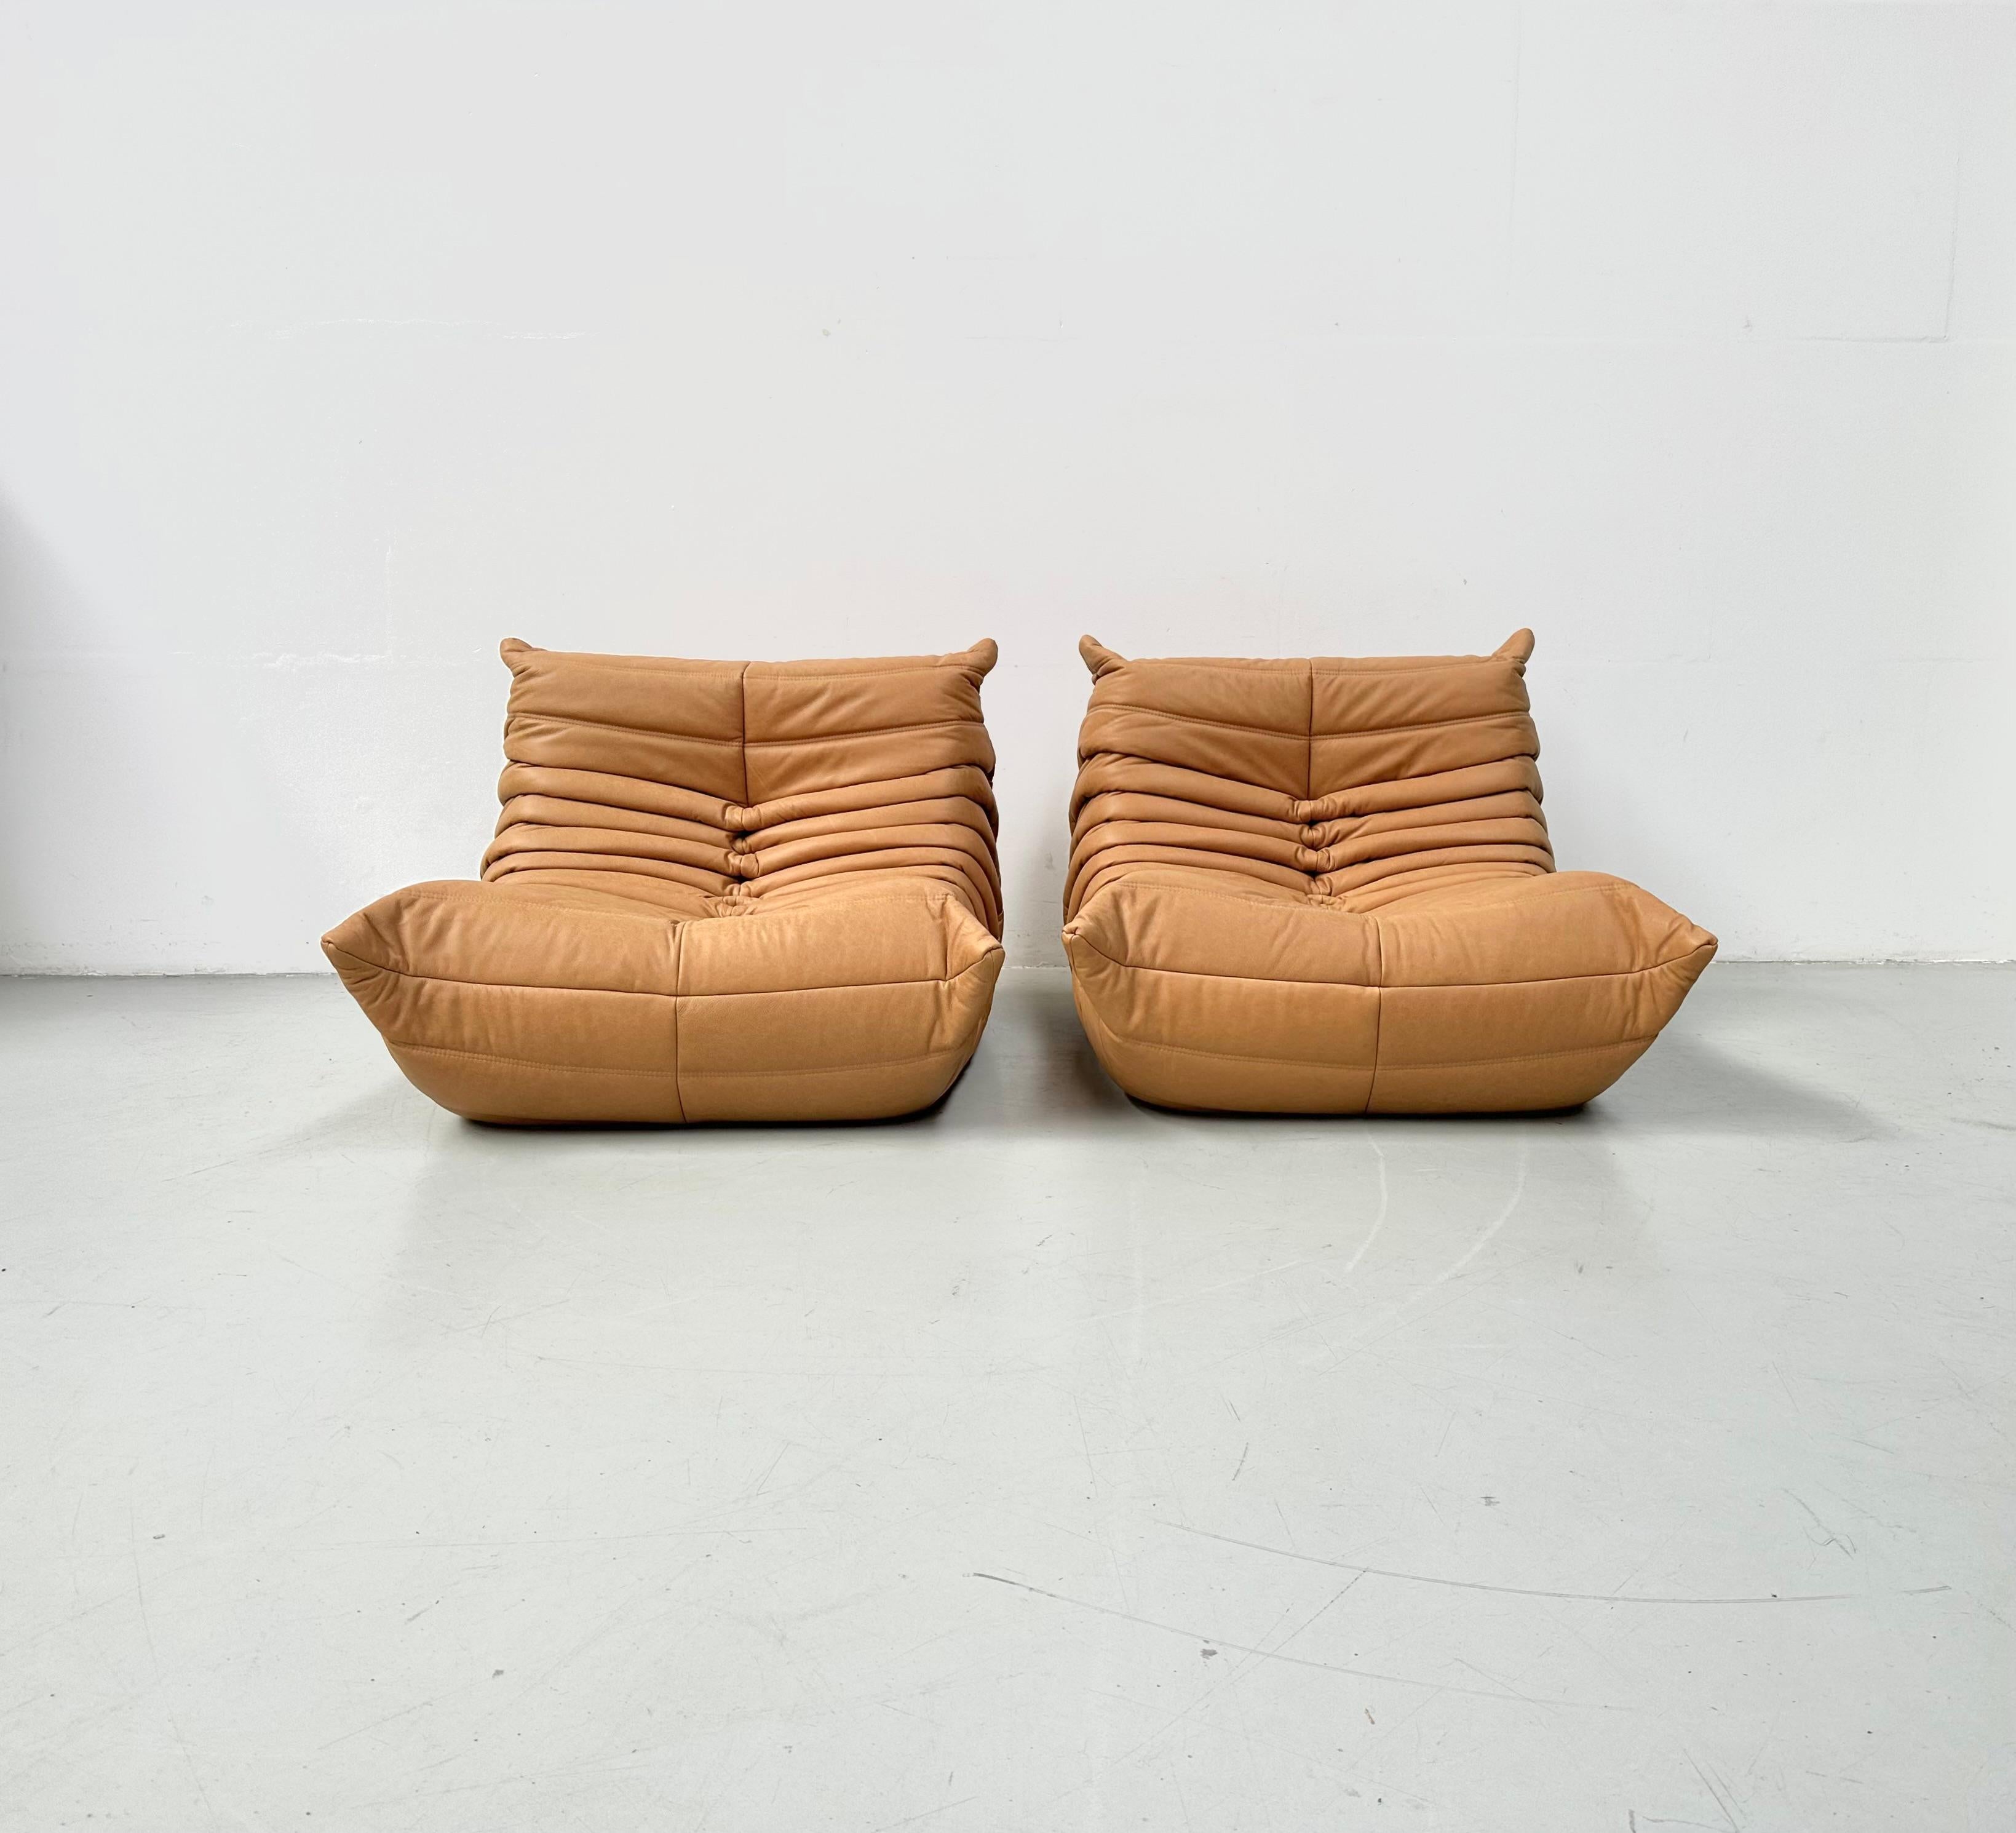 Mid-Century Modern French Togo Chairs in Camel Leather by Michel Ducaroy for Ligne Roset.